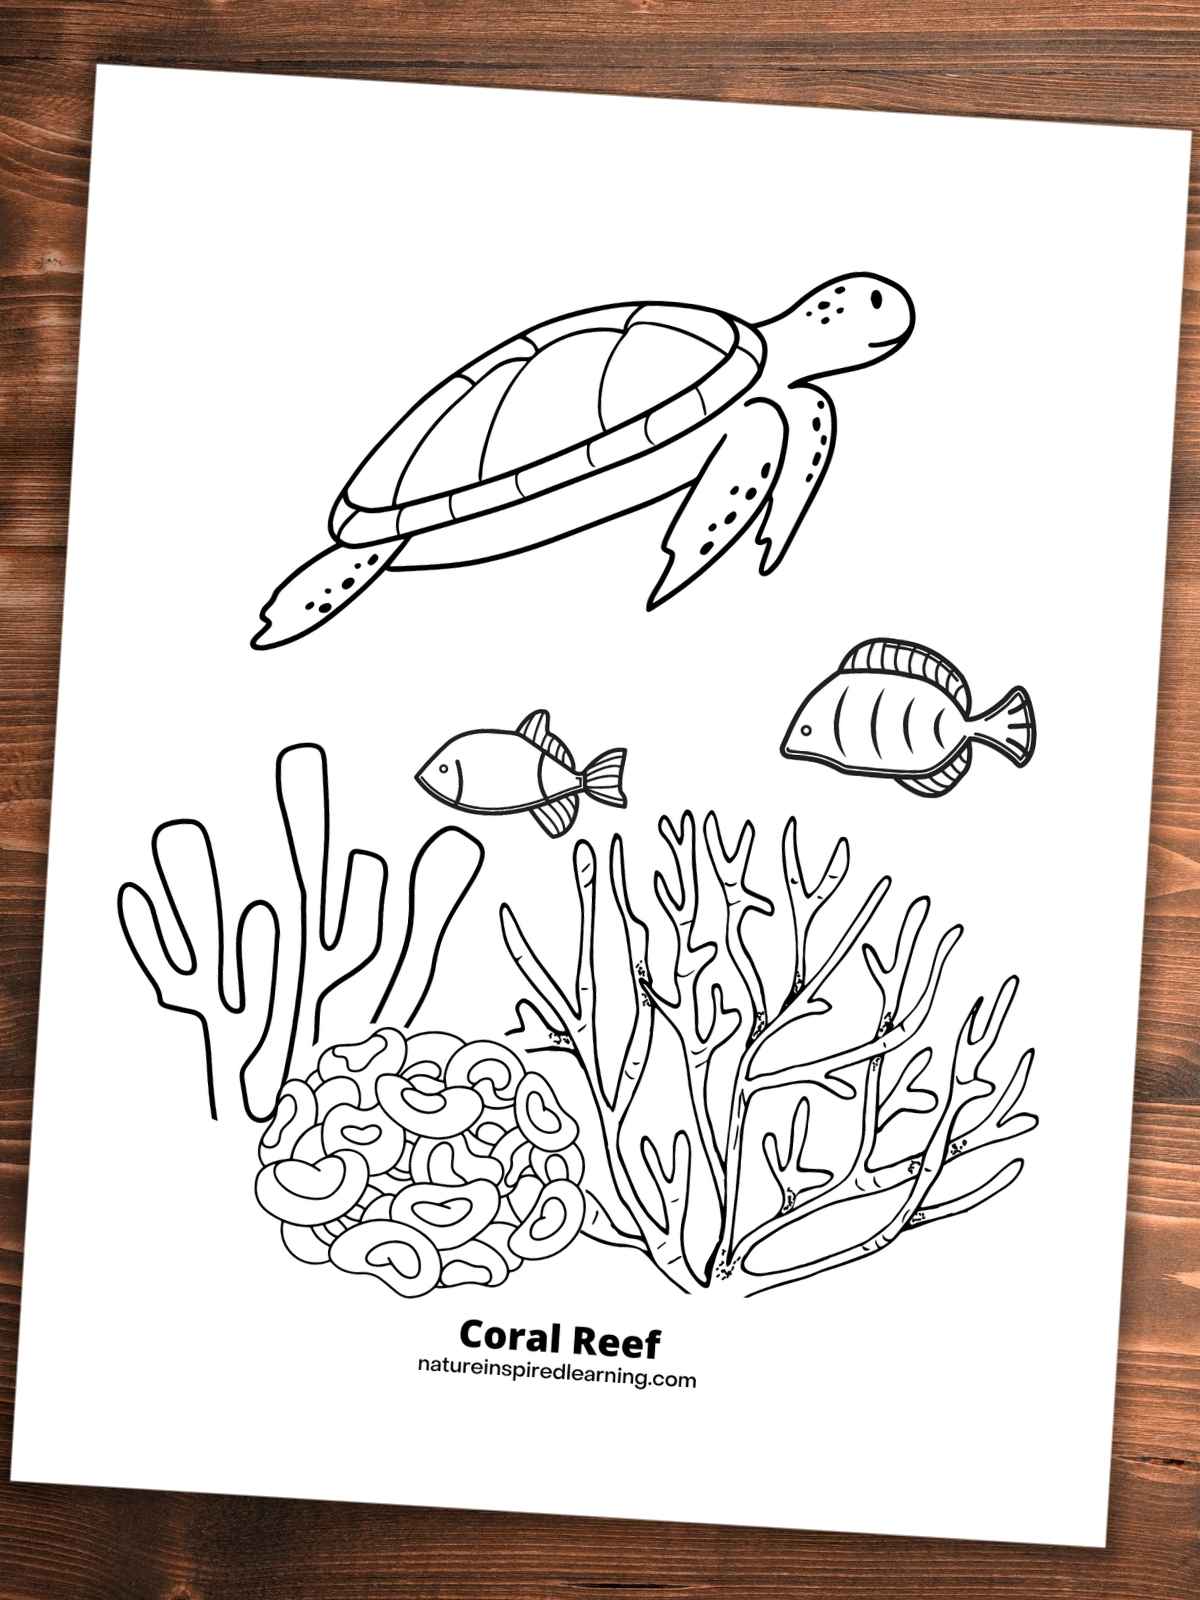 black and white design with a sea turtle, two fish, and three different varieties of coral on a wooden backgroundl